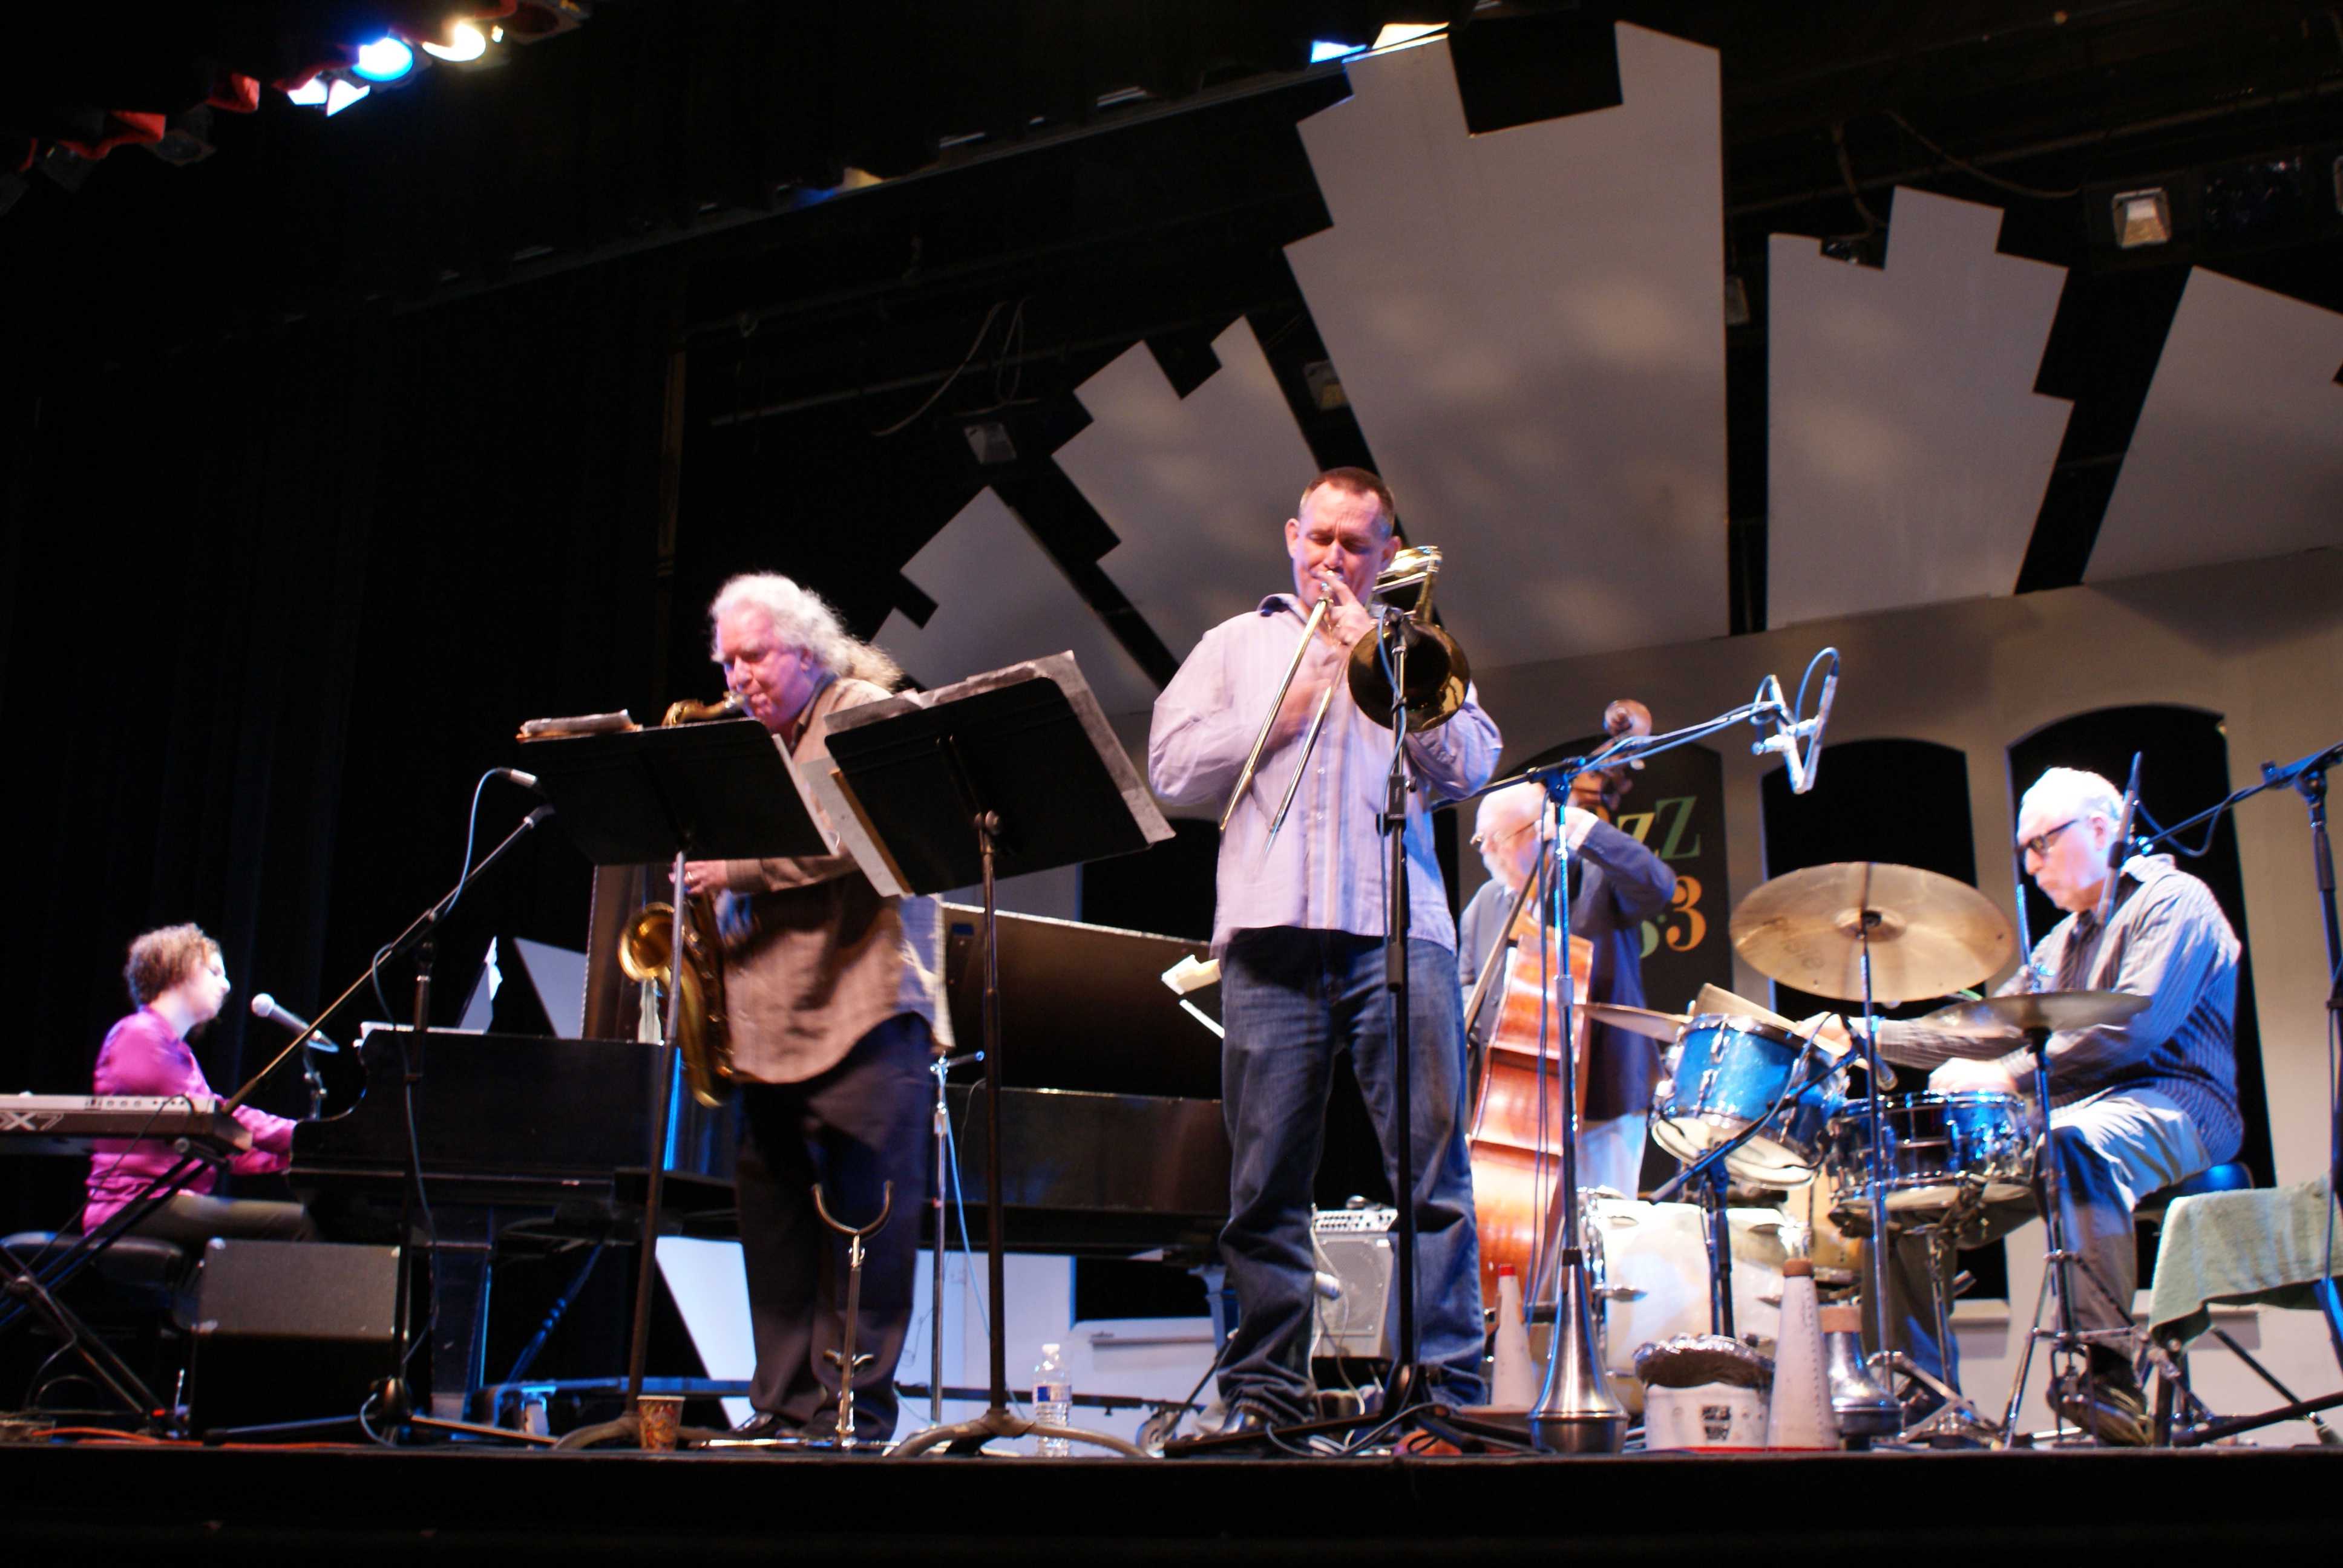 Right to left: Billy Mintz, Putter Smith, John Gross, and Roberta Piket. The Billy Mintz Band performed live on radio air at the Saville Theater on Oct. 9. Torrey Spoerer, City Times.